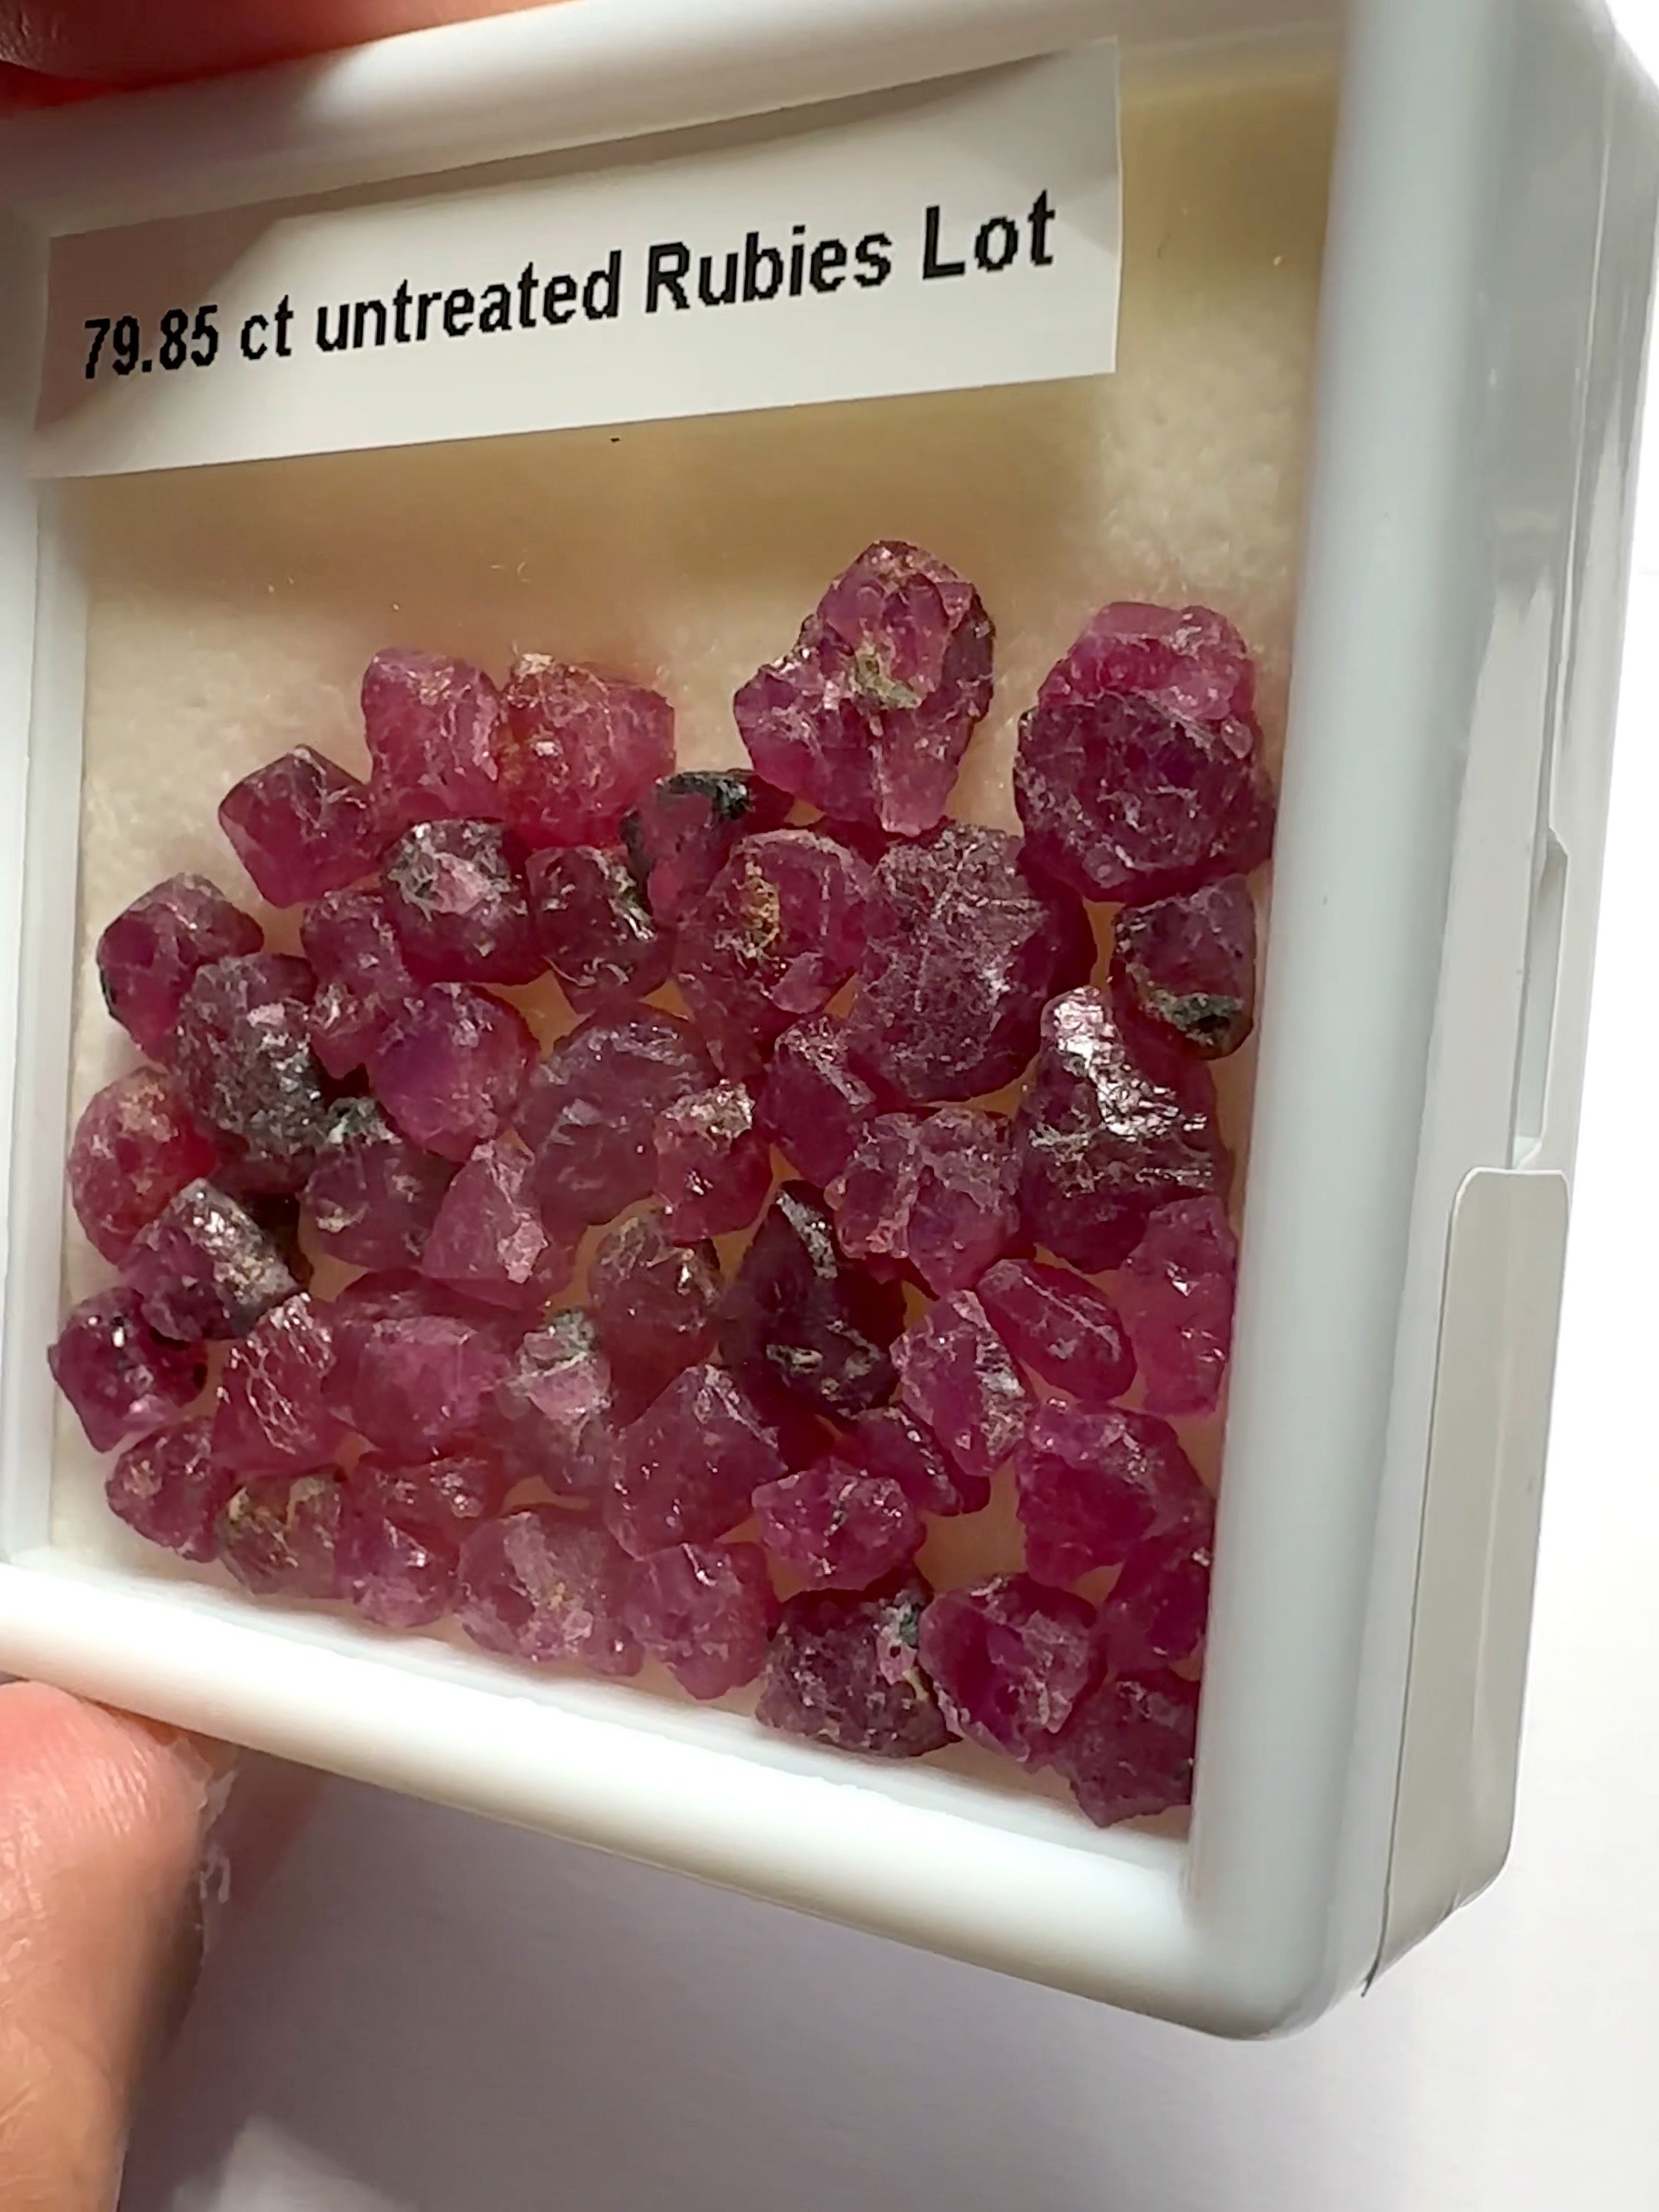 79.85ct Ruby Lot, Winza, Tanzania, Untreated Unheated, good for setting as is